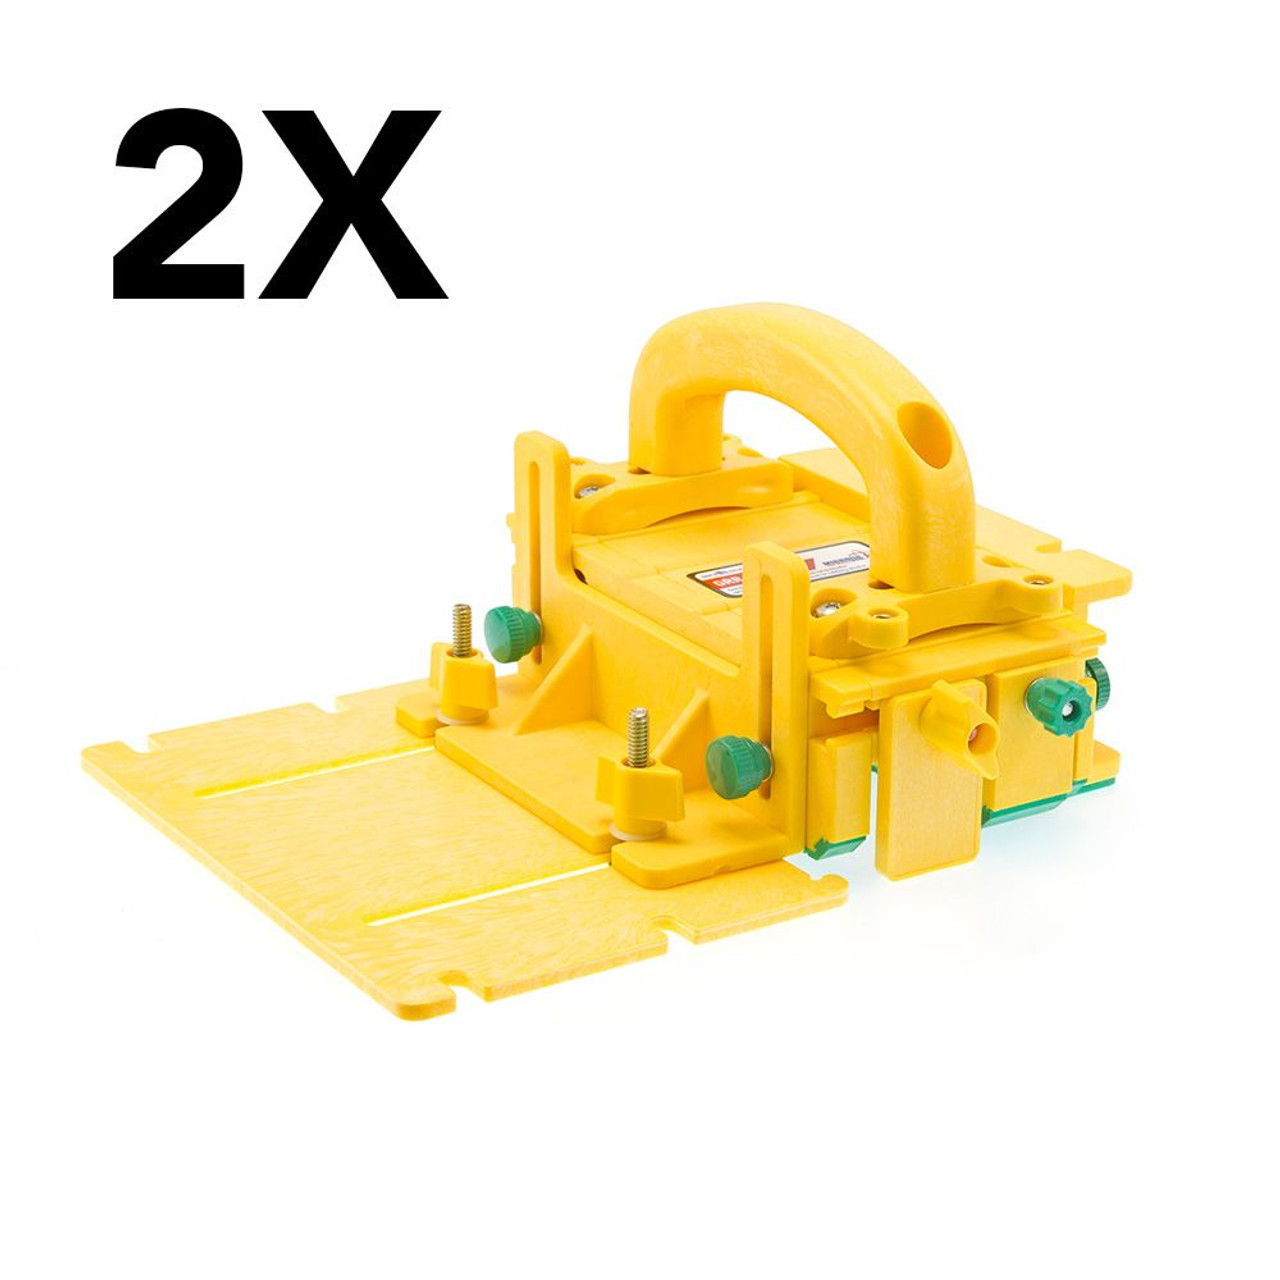 MICROJIG GRR-RIPPER GR-100 3D Adjustable Table Saw Pushblock 2-Pack, Yellow - 4